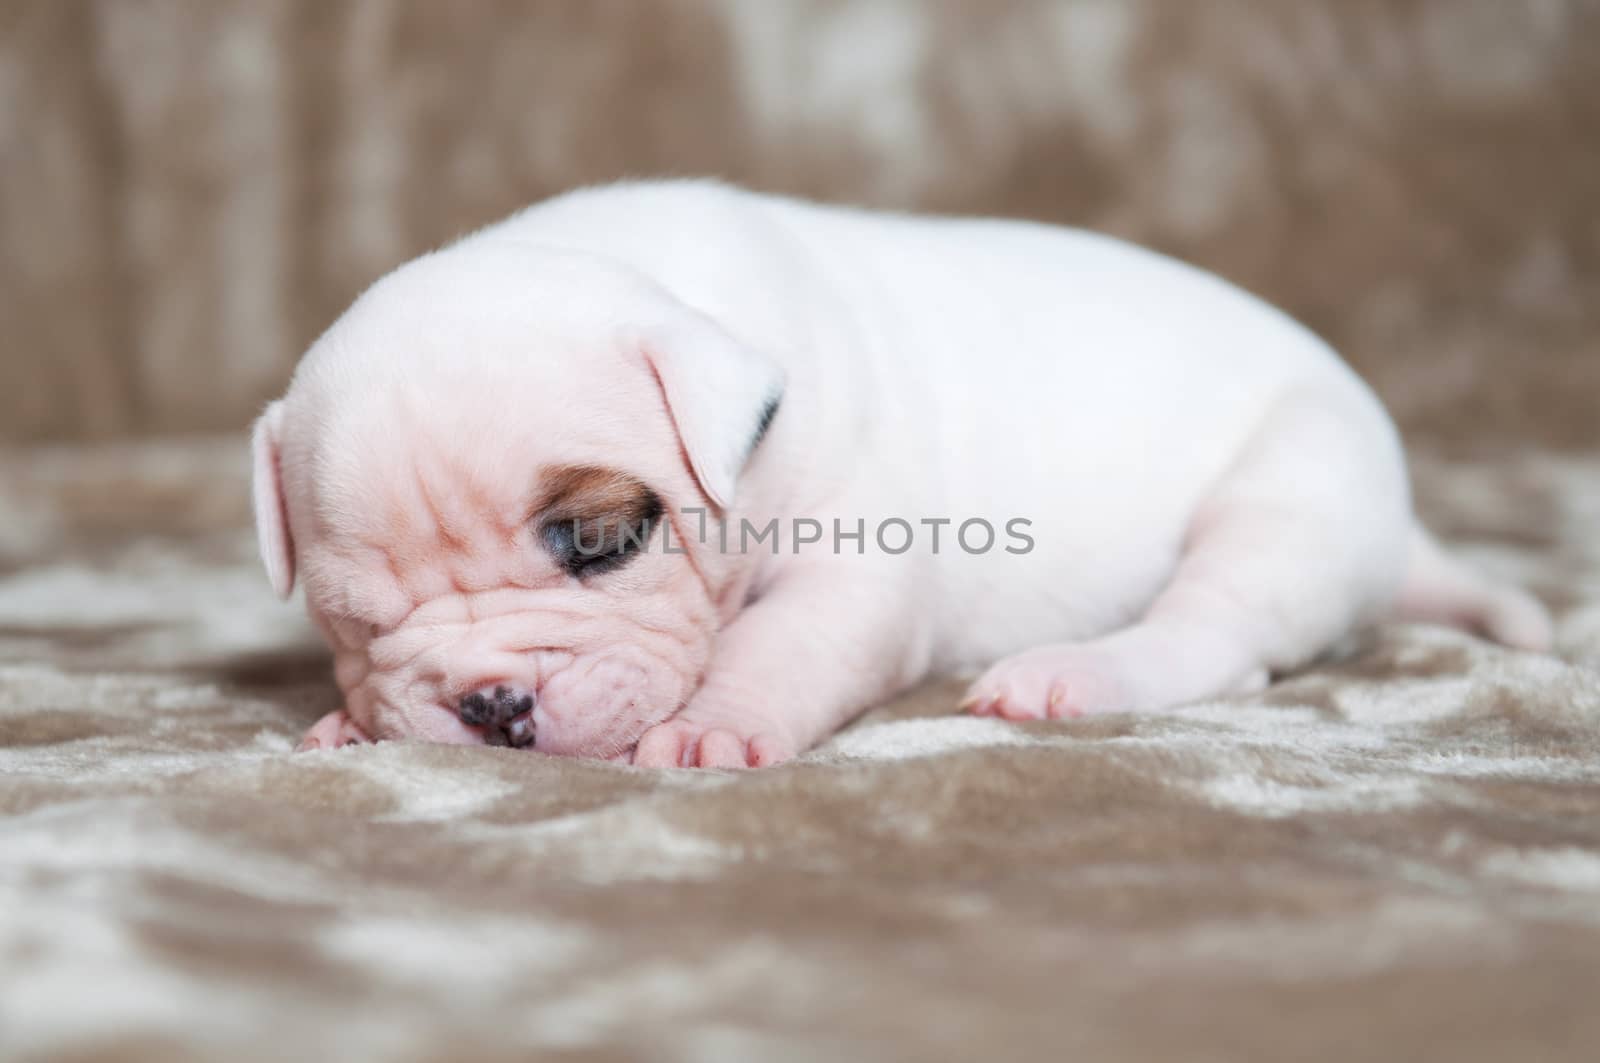 Funny small American Bulldog puppy dog on light background. The puppy is sleeping